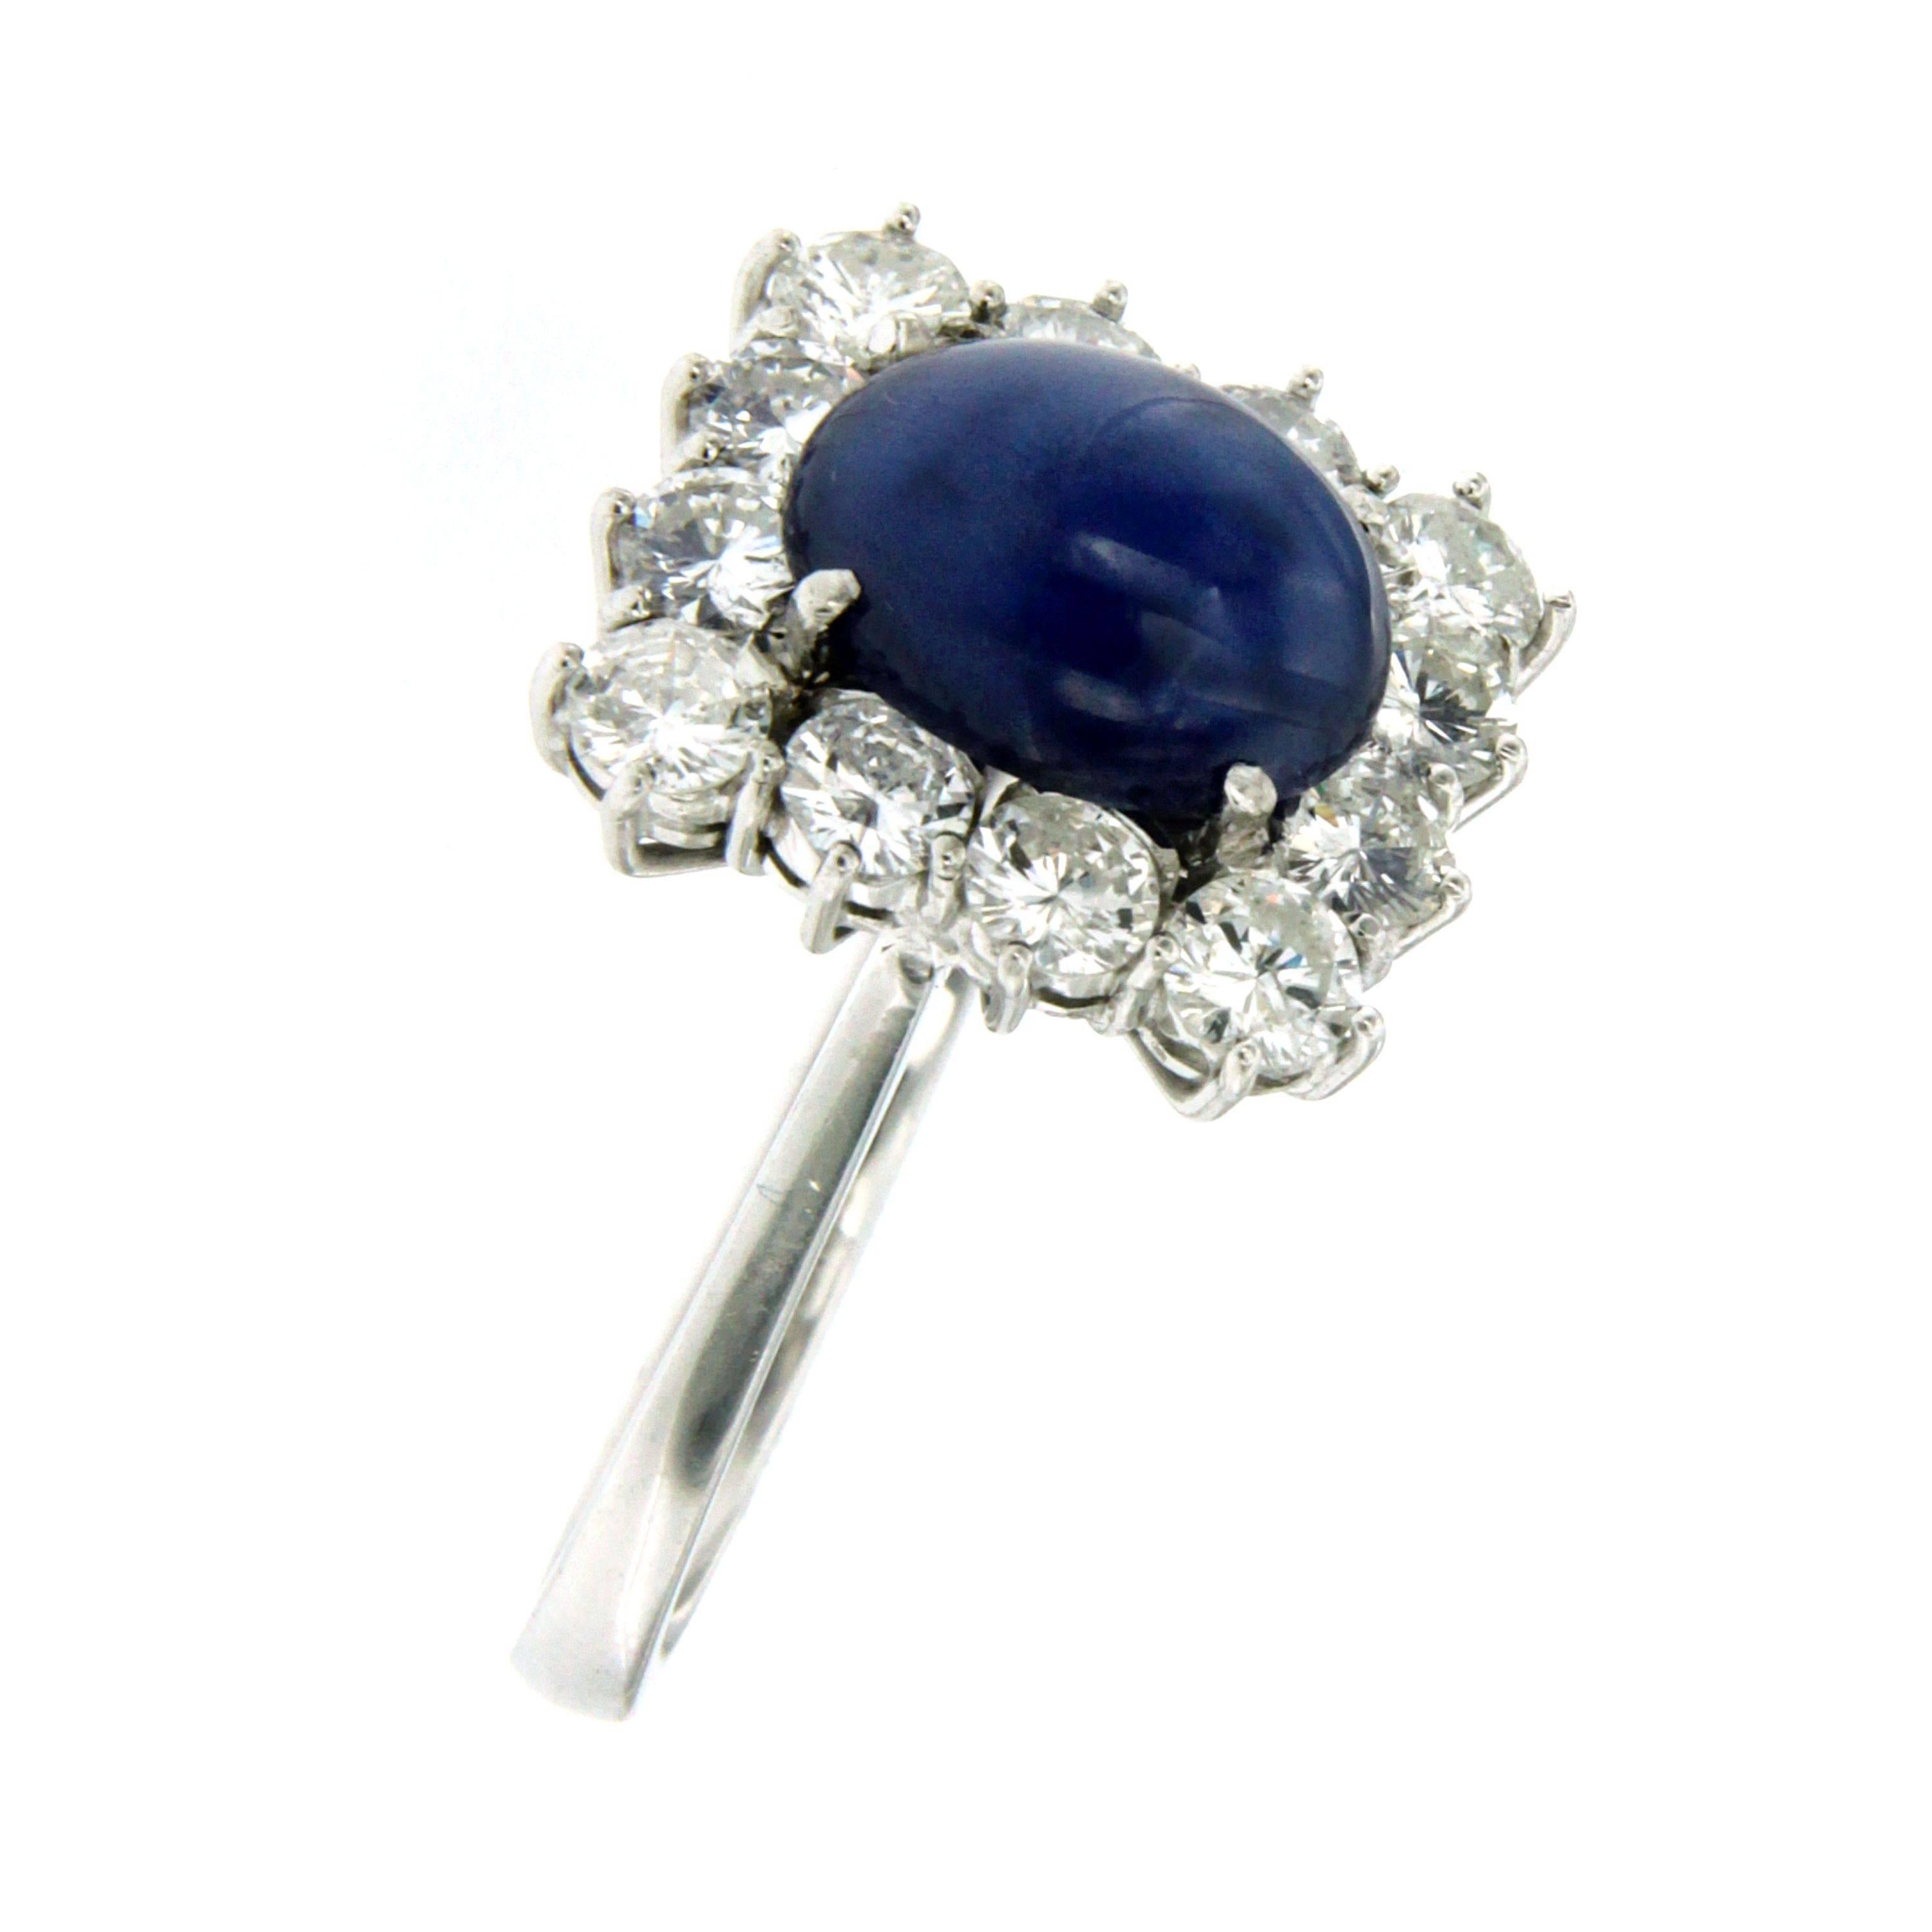 Rare Star Sapphire and Diamond Ring, set in the center with a Beautiful oval cabochon Star Sapphire weighing 3.10 carats framed by a square halo consisting of 1.80 carat of round brilliant cut diamonds graded F color and Vs clarity.
Circa